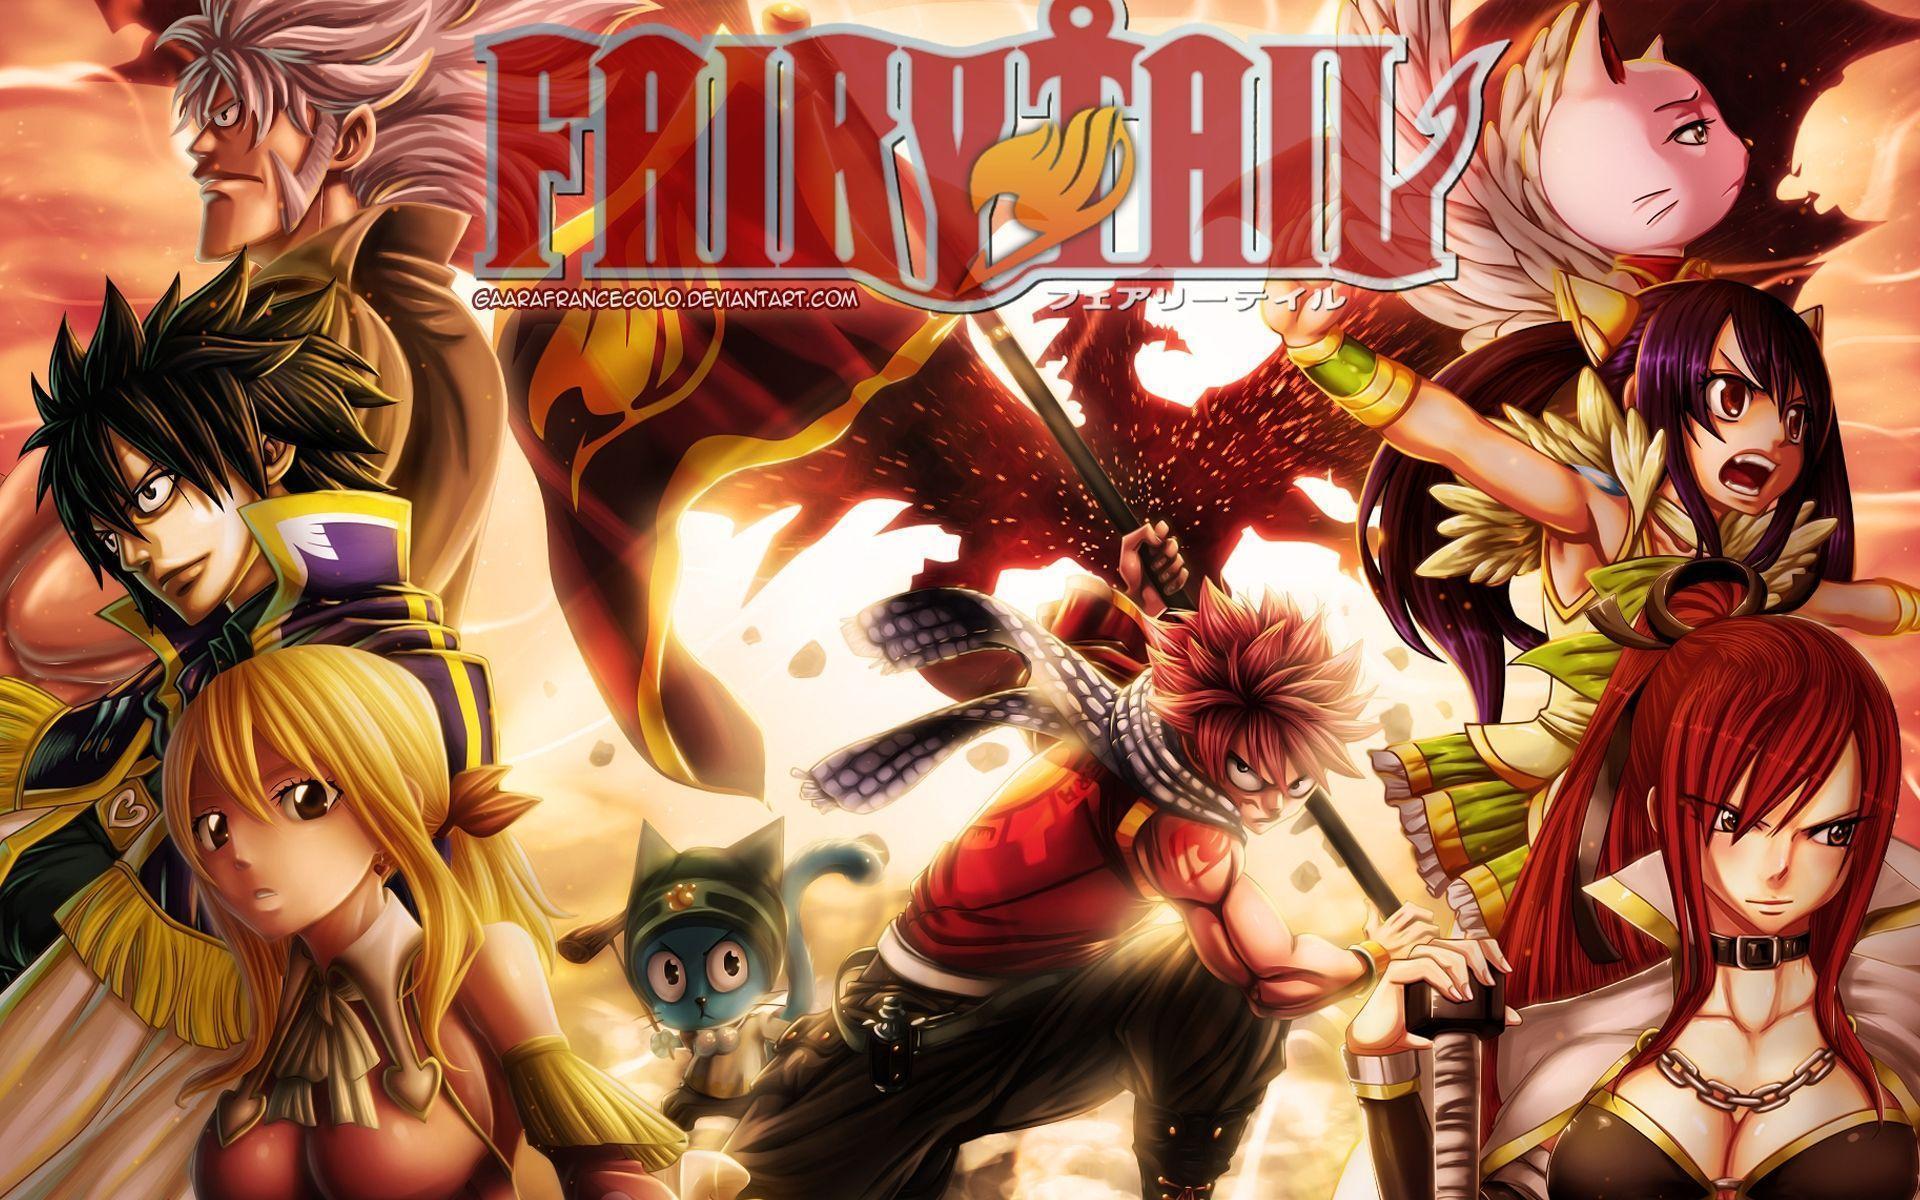 Fairy Tail 2016 Wallpapers - Wallpaper Cave